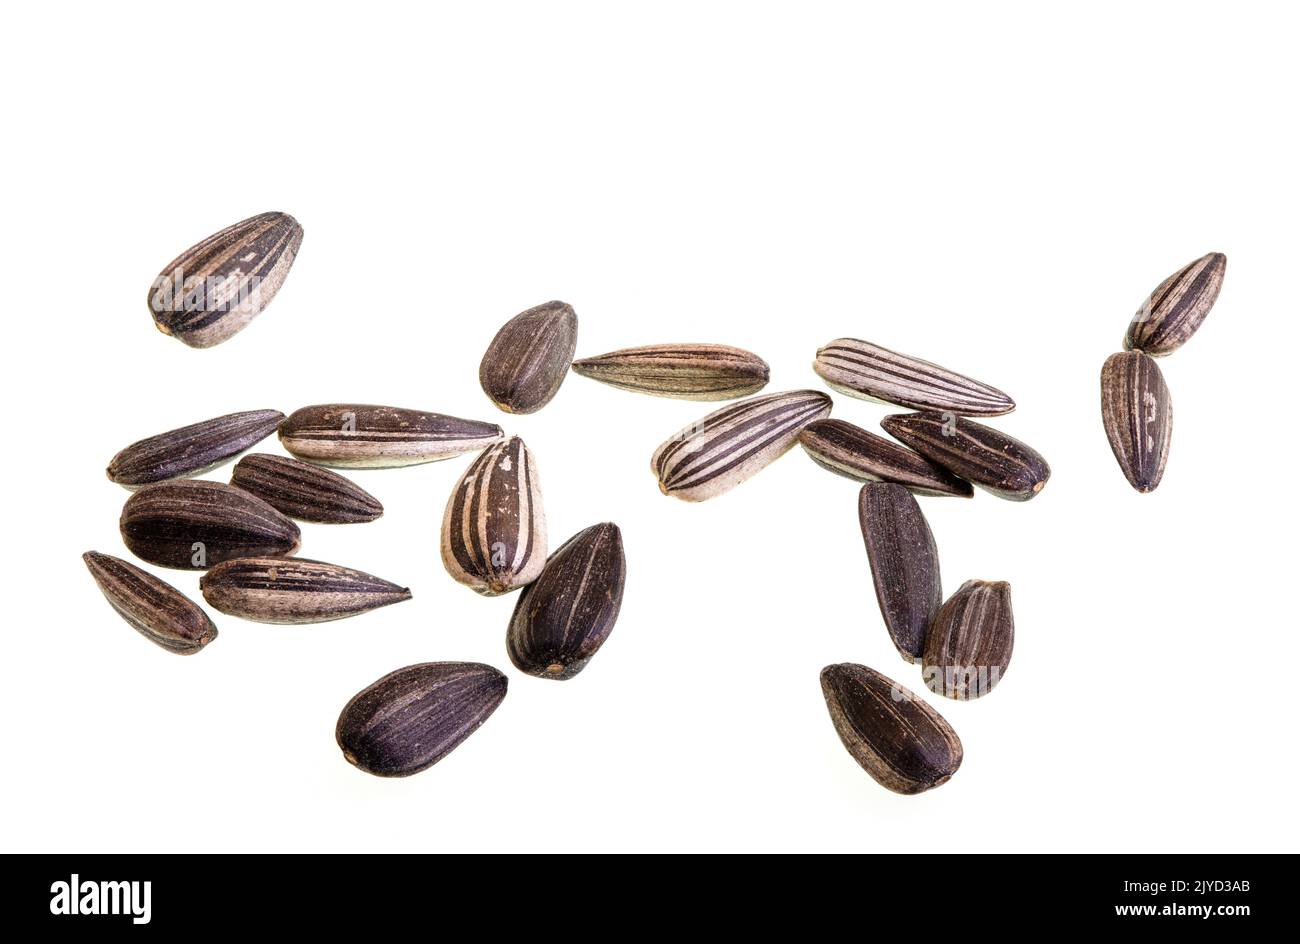 Sunflower seed is the seed of the sunflower plant, Helianthus annuus, native to North and Central America. Stock Photo